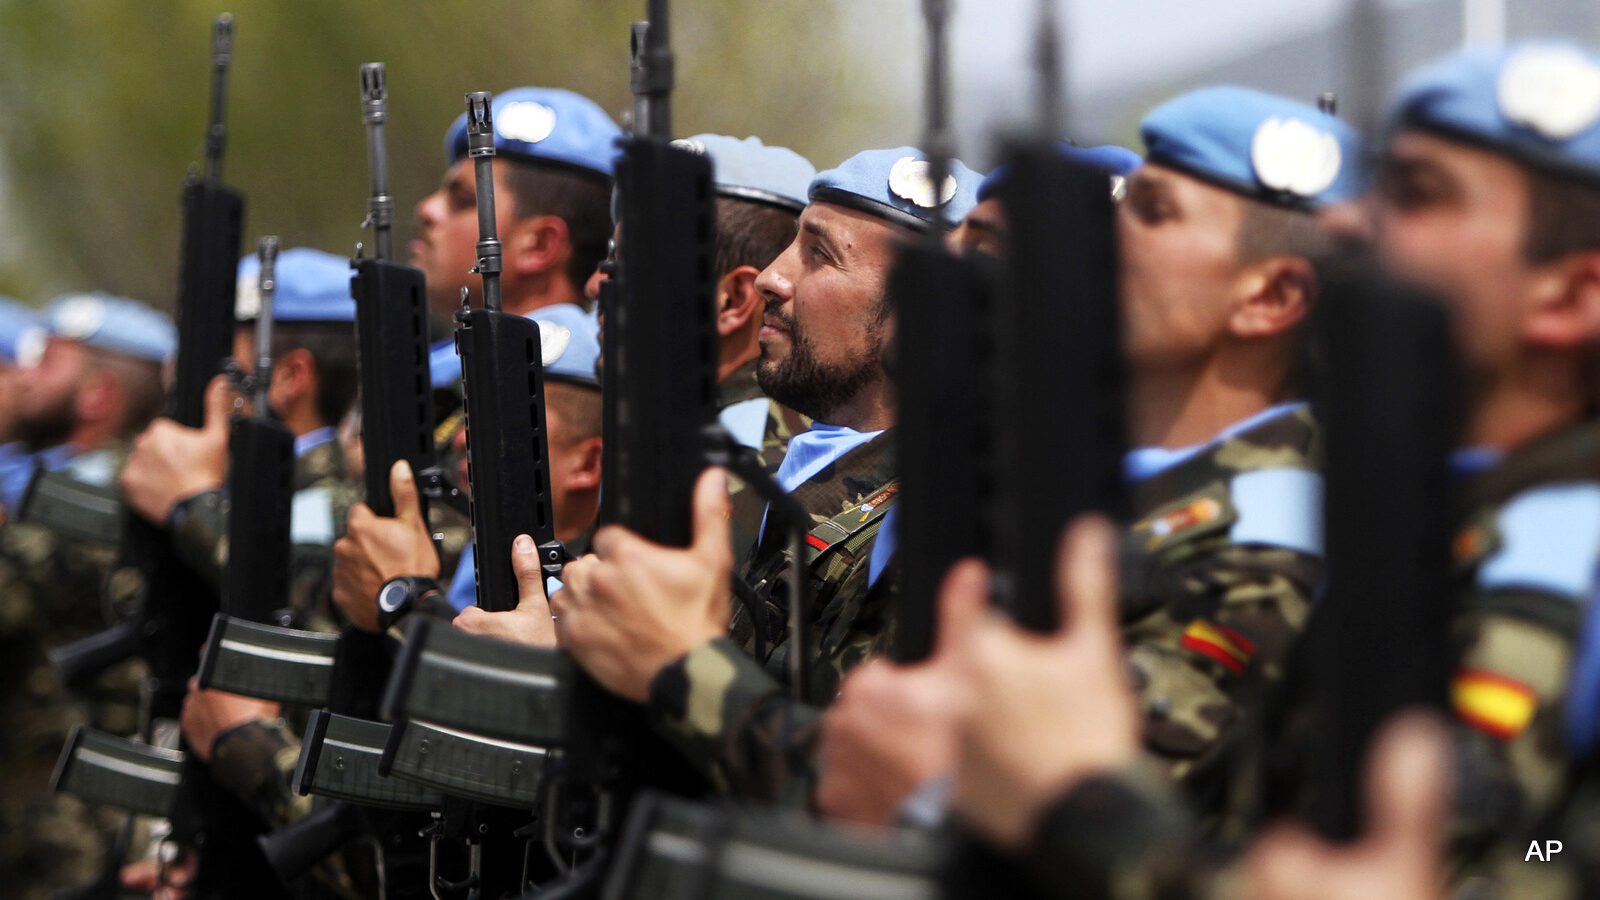 Members of the Spanish U.N. peacekeepers honor guard hold their rifles as they receive Spain's King Felipe VI during his visit to their base in the southern village of Blatt, Lebanon, Wednesday, April 8, 2015. (AP Photo/Mohammed Zaatari)